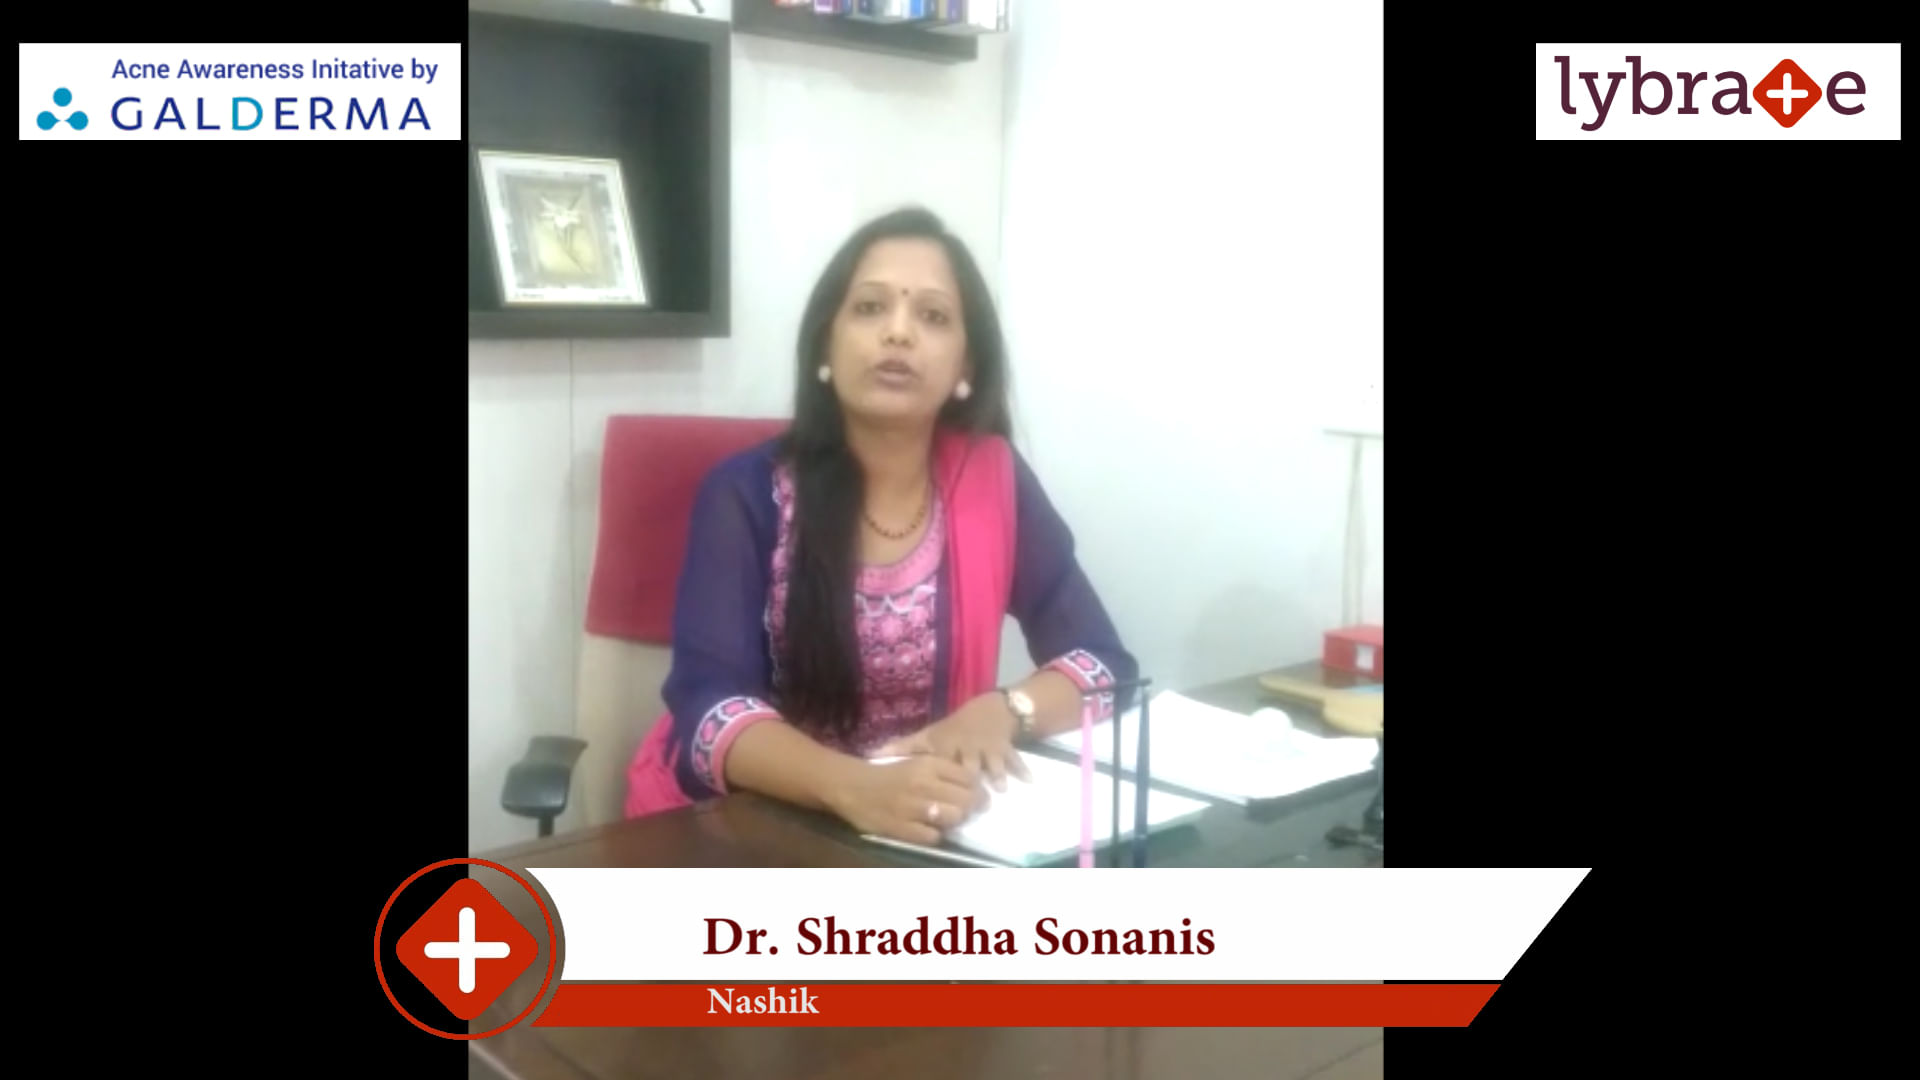 Lybrate | Dr. Shraddha Sonanis speaks on IMPORTANCE OF TREATING ACNE EARLY